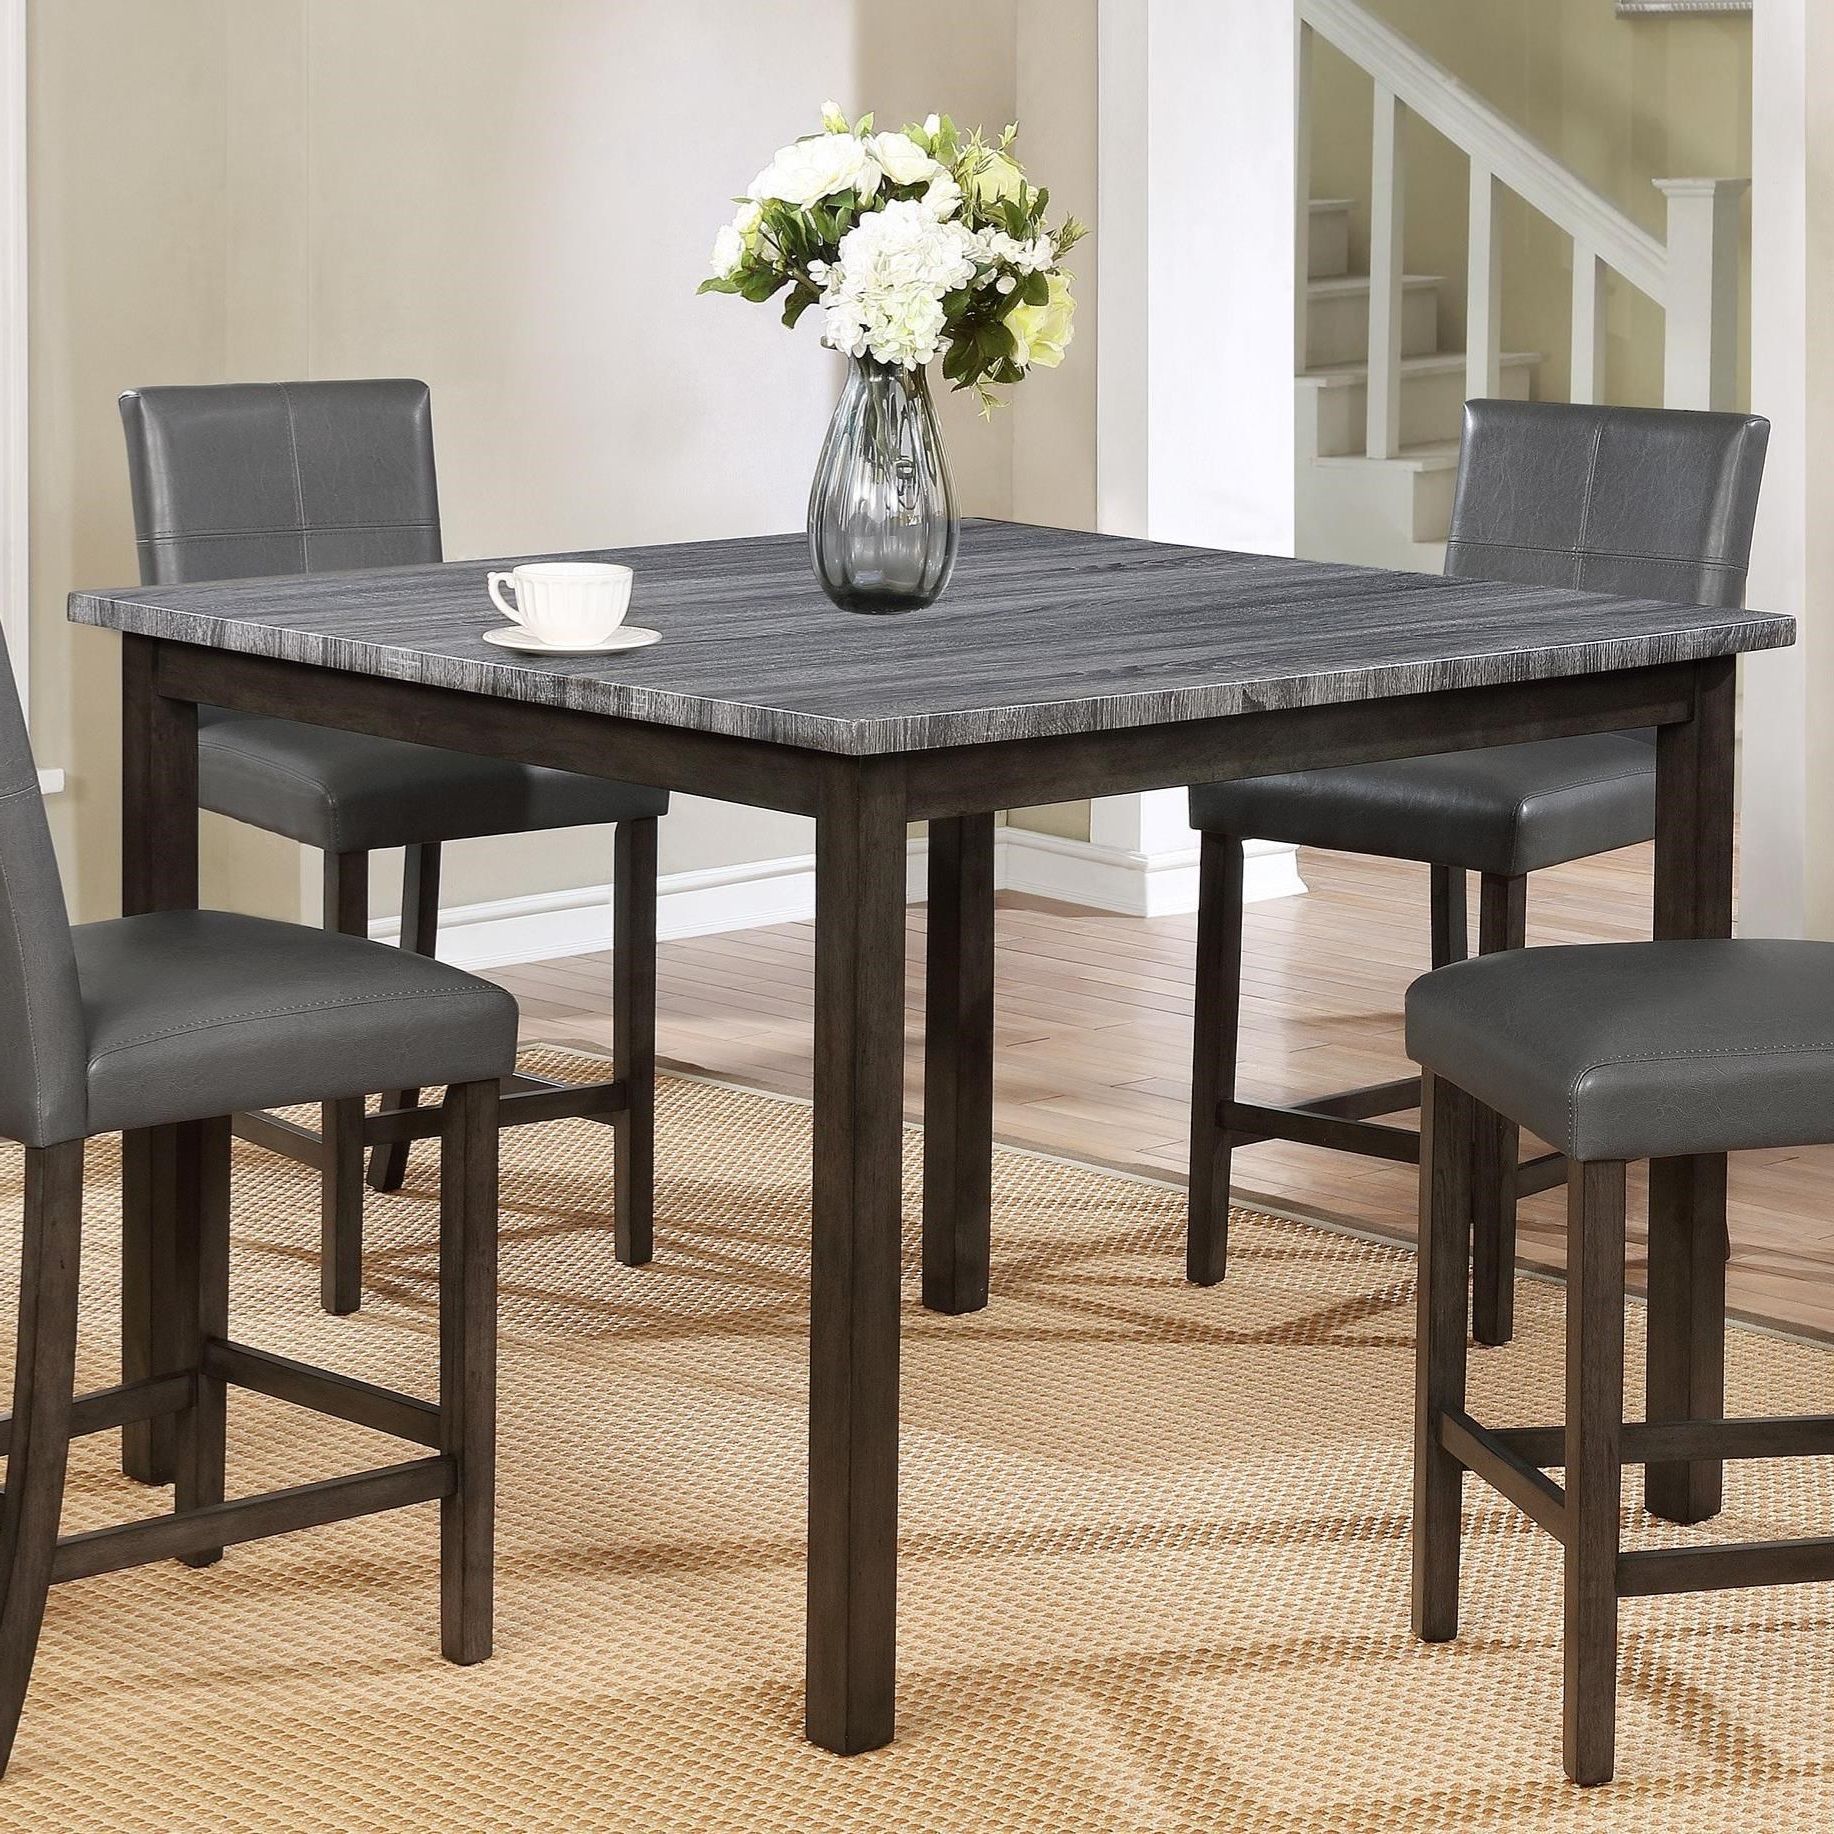 Pennside Counter Height Dining Tables Intended For 2019 Crown Mark Pompei Two Tone Counter Height Dining Table (View 7 of 20)